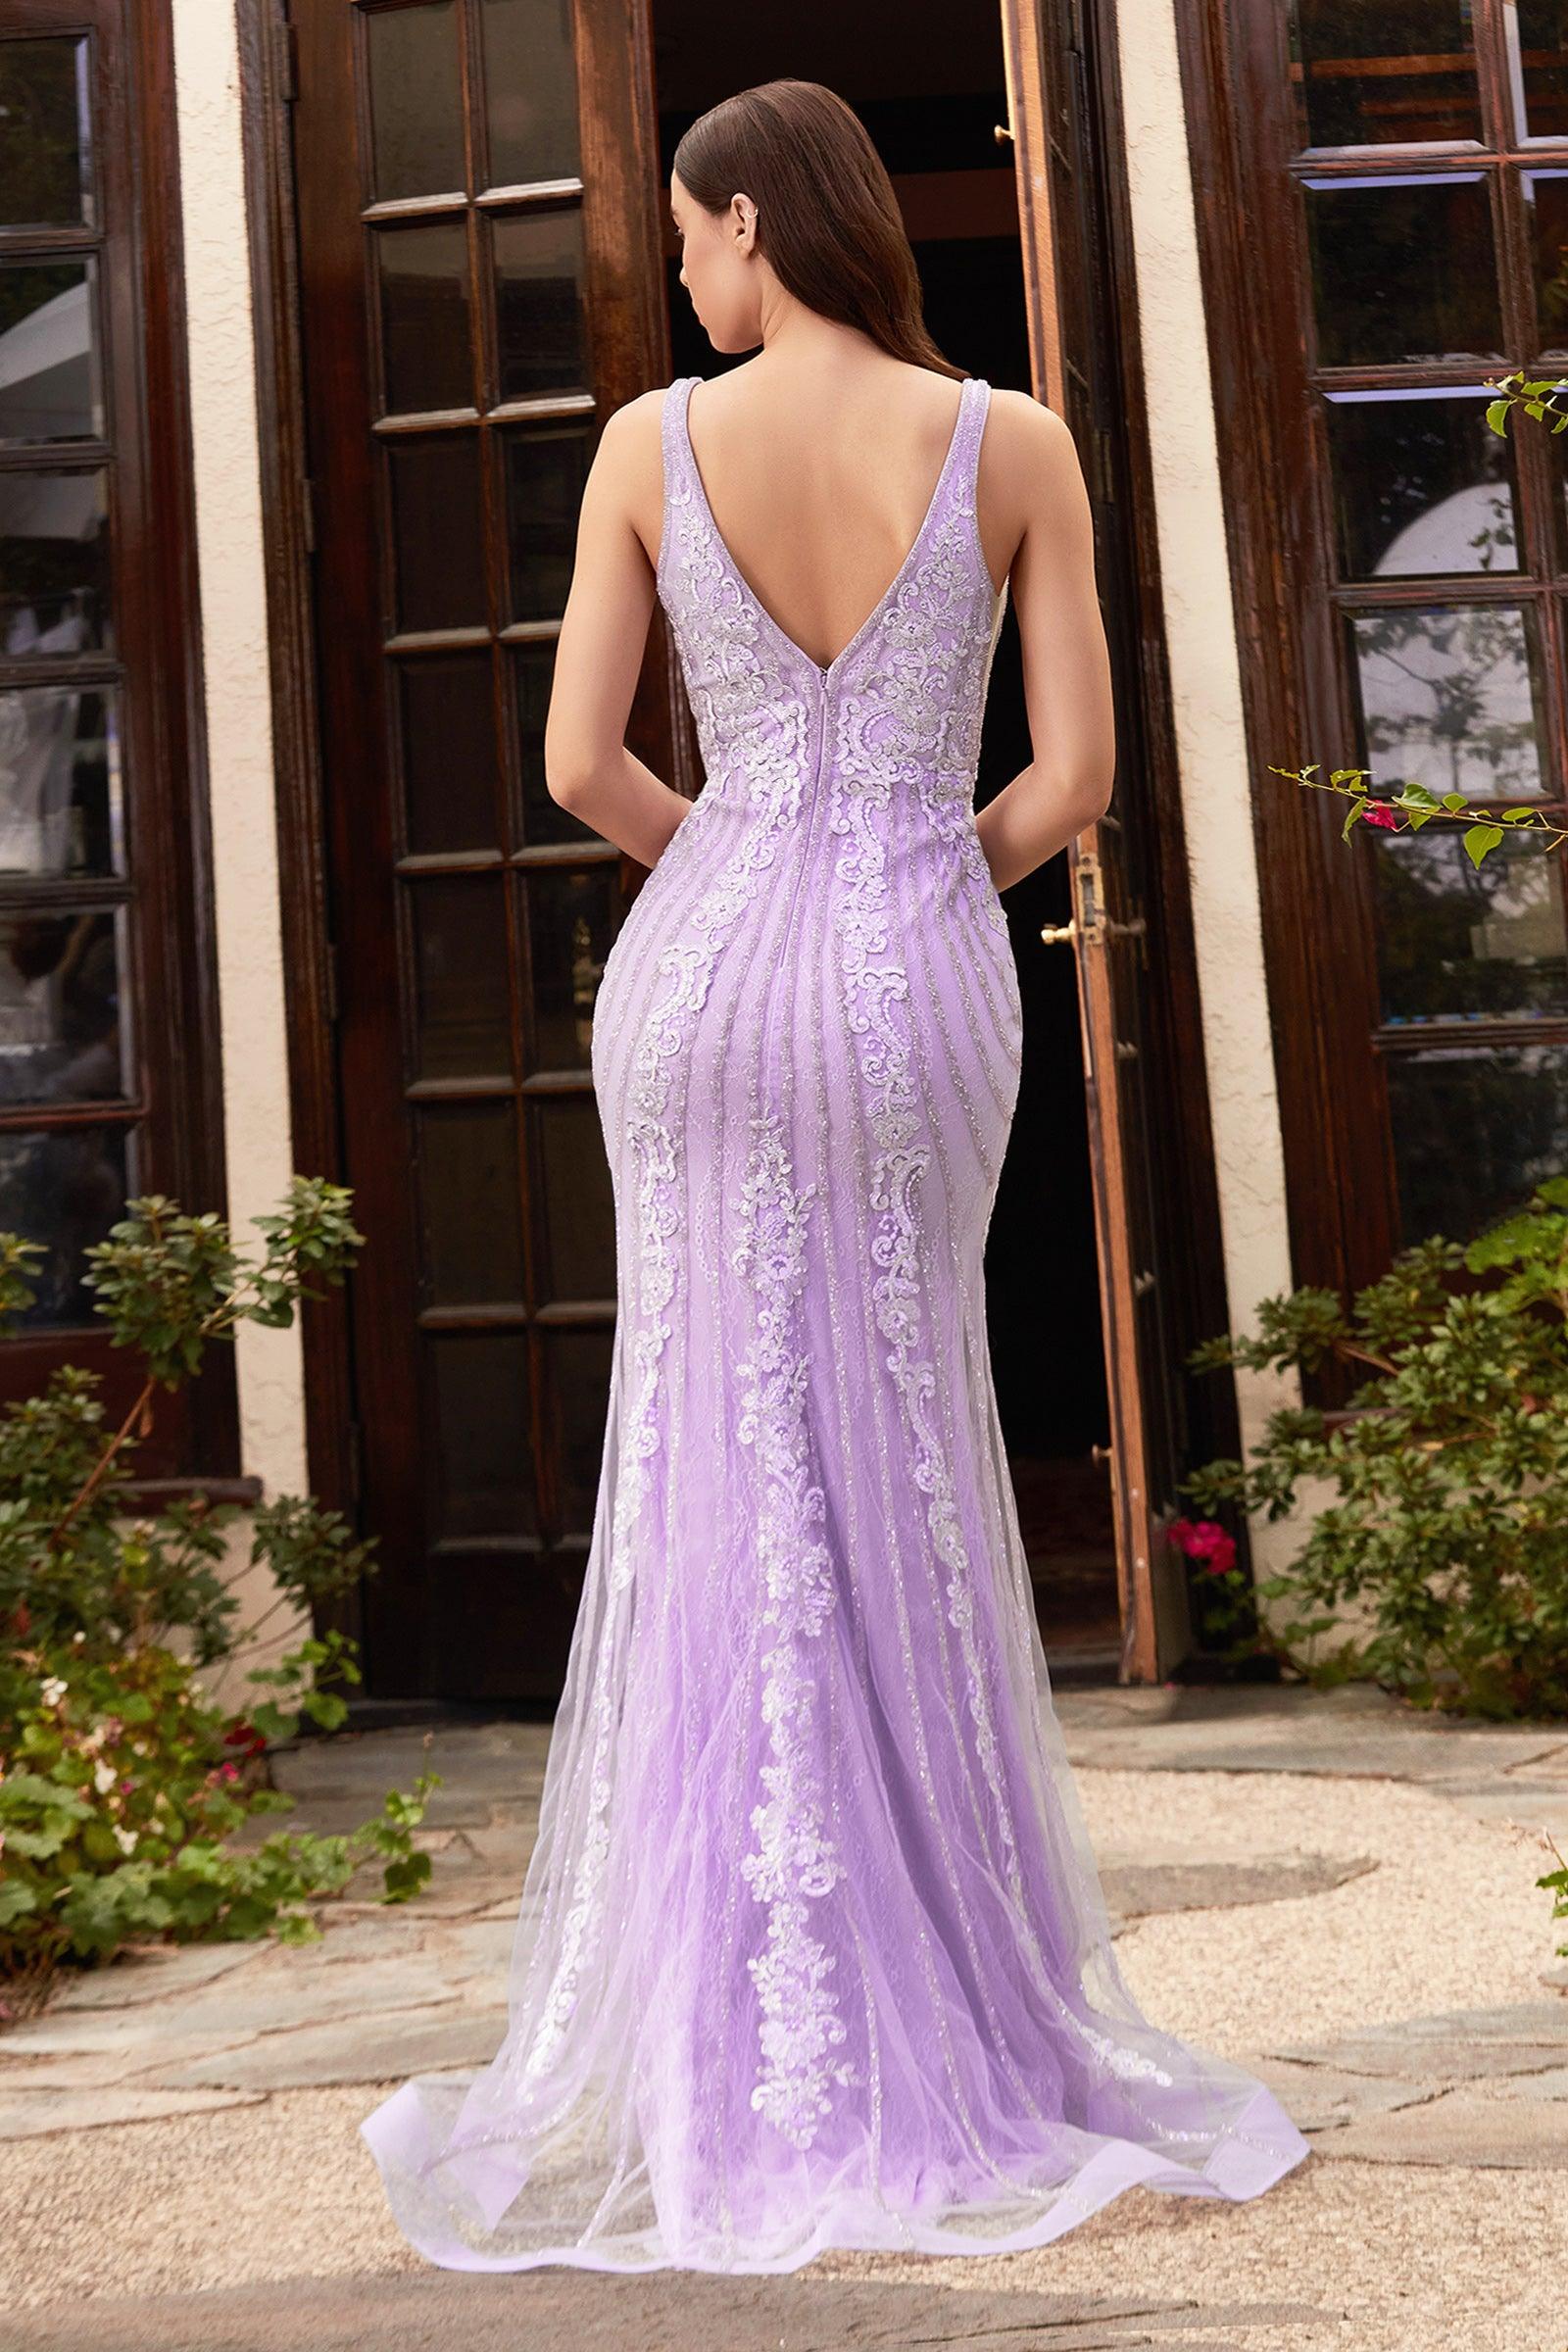 Sleeveless Formal Prom Long Dress - The Dress Outlet